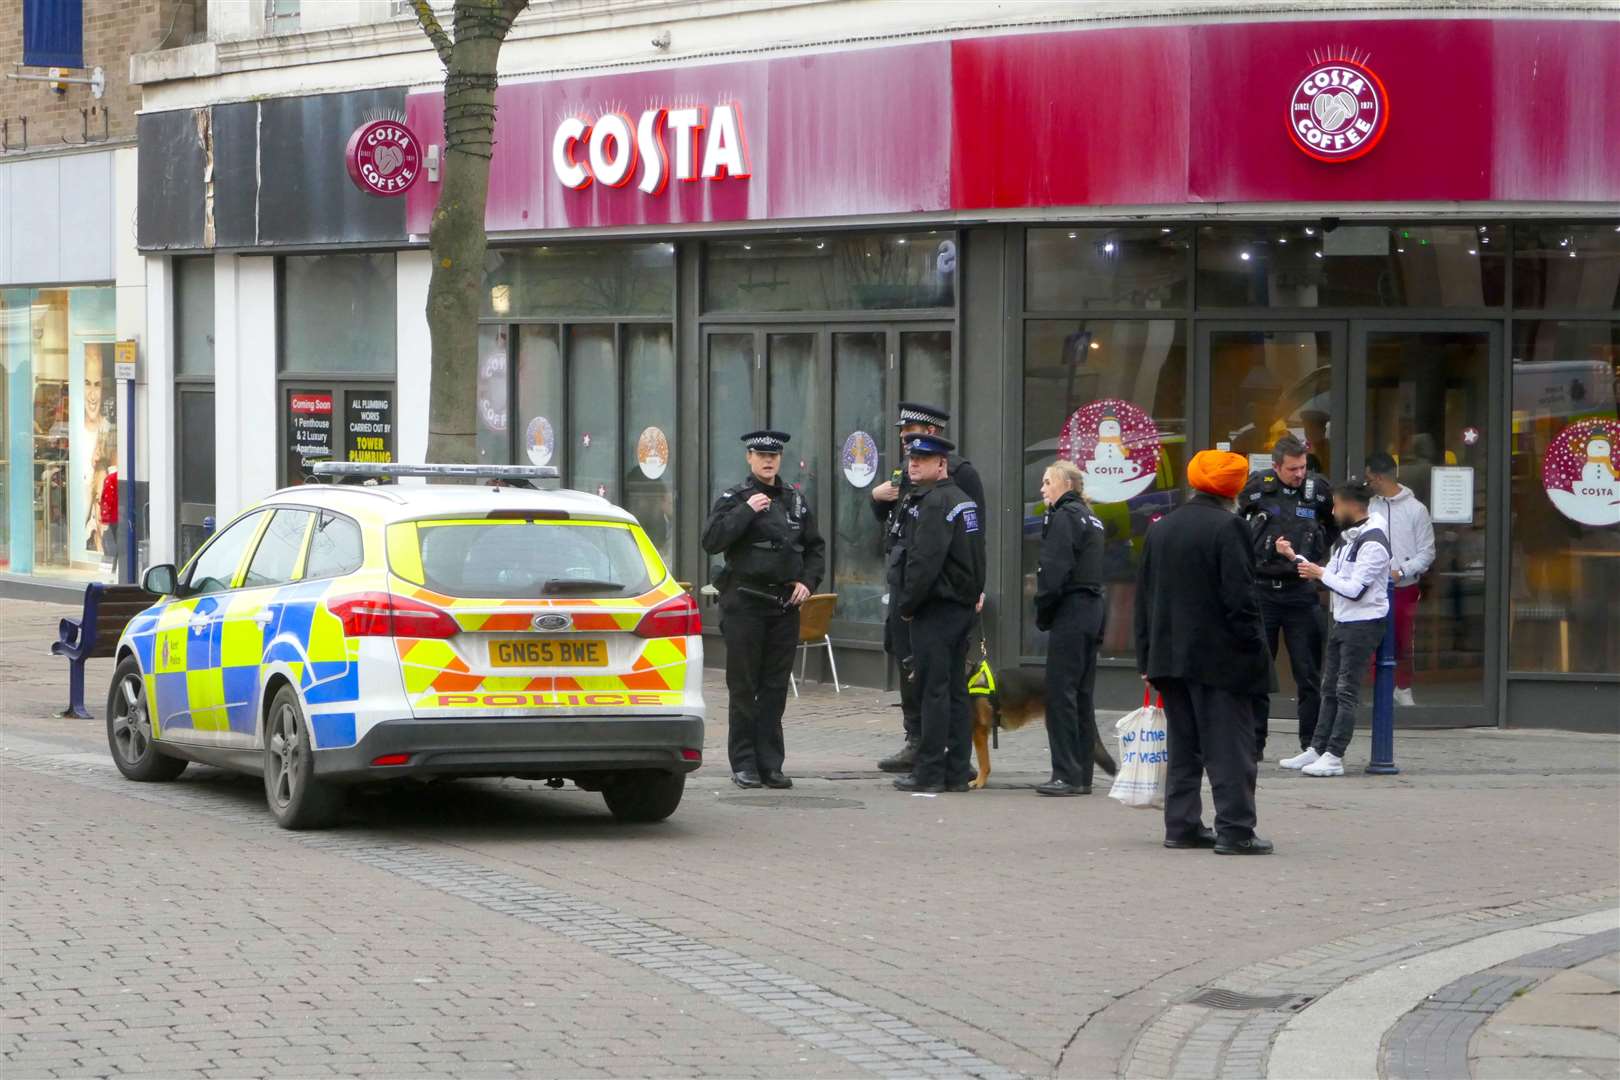 Police were spotted outside Costa (5612282)